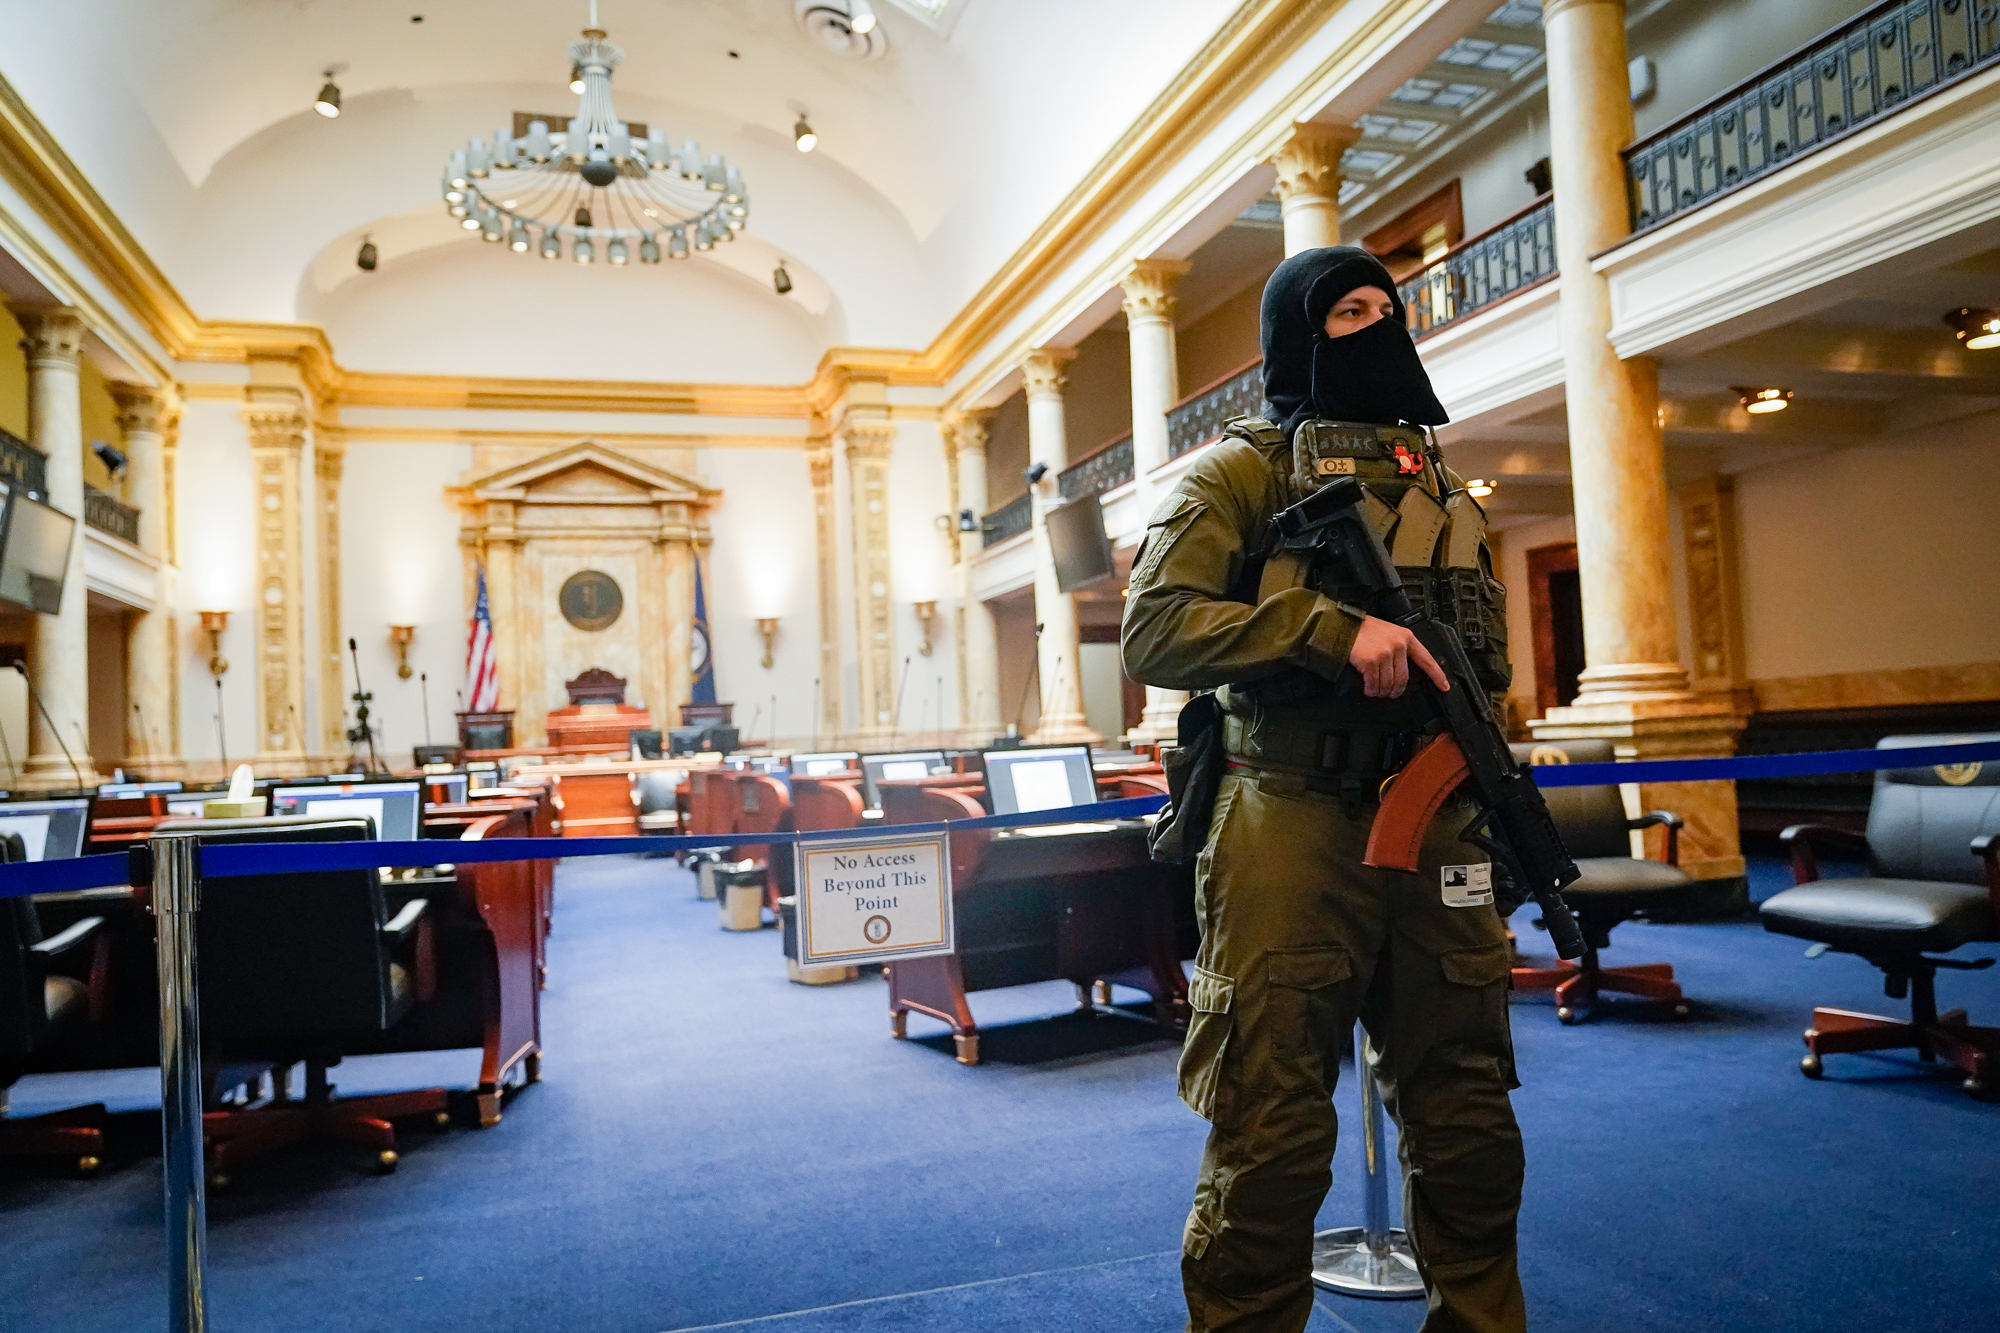 Gunmen Some In Masks Swarm Ky Capitol For 2nd Amendment Rally